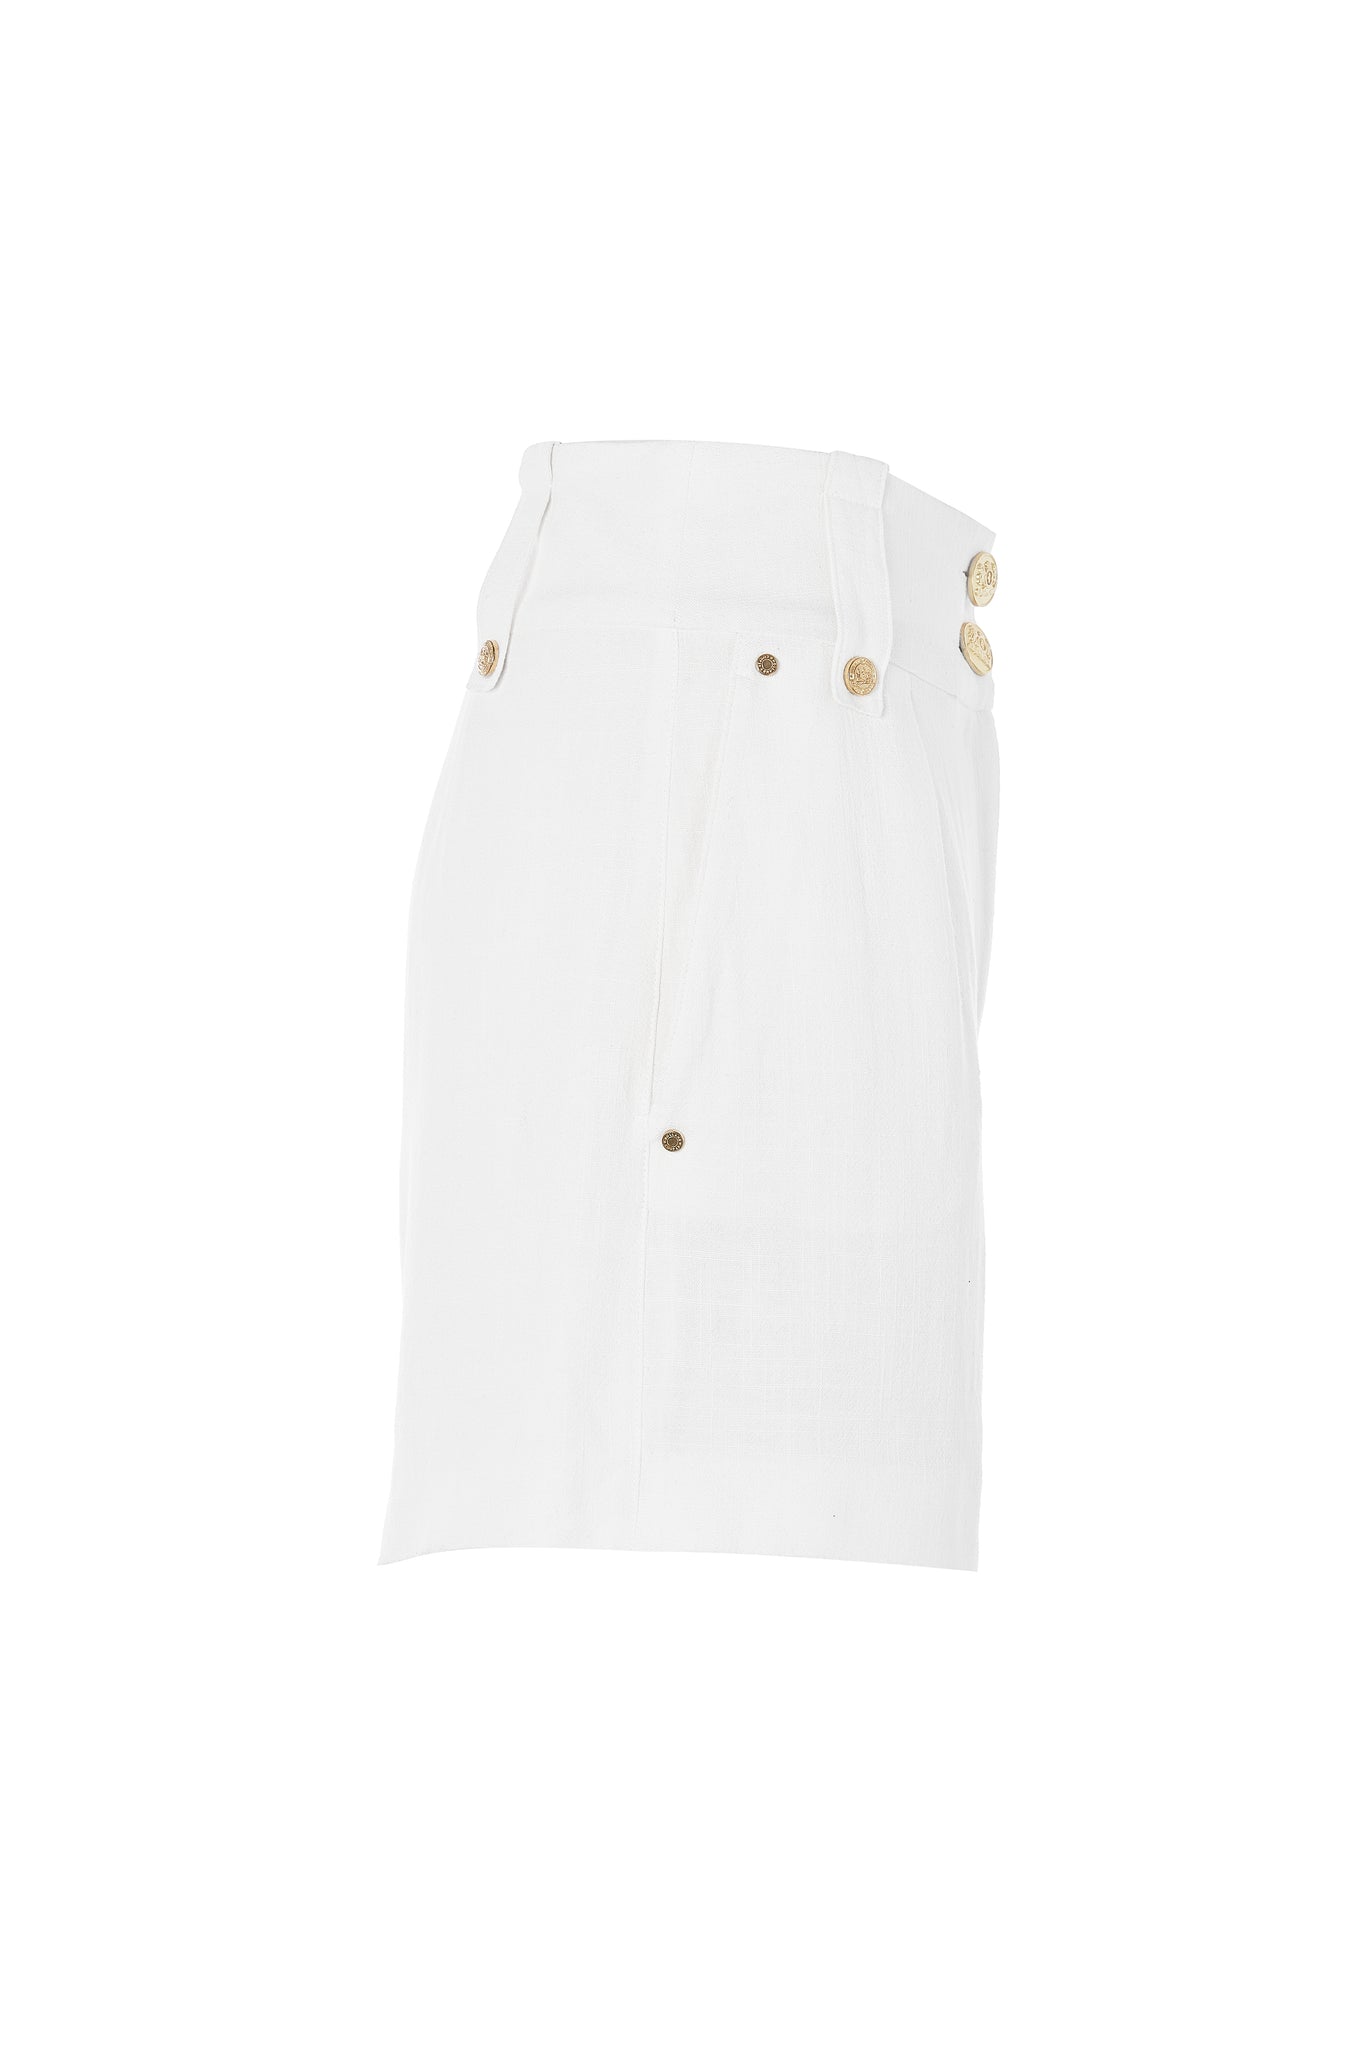 side of womens white linen tailored shorts with two single knife pleats and centre front zip fly fastening with two gold stud buttons